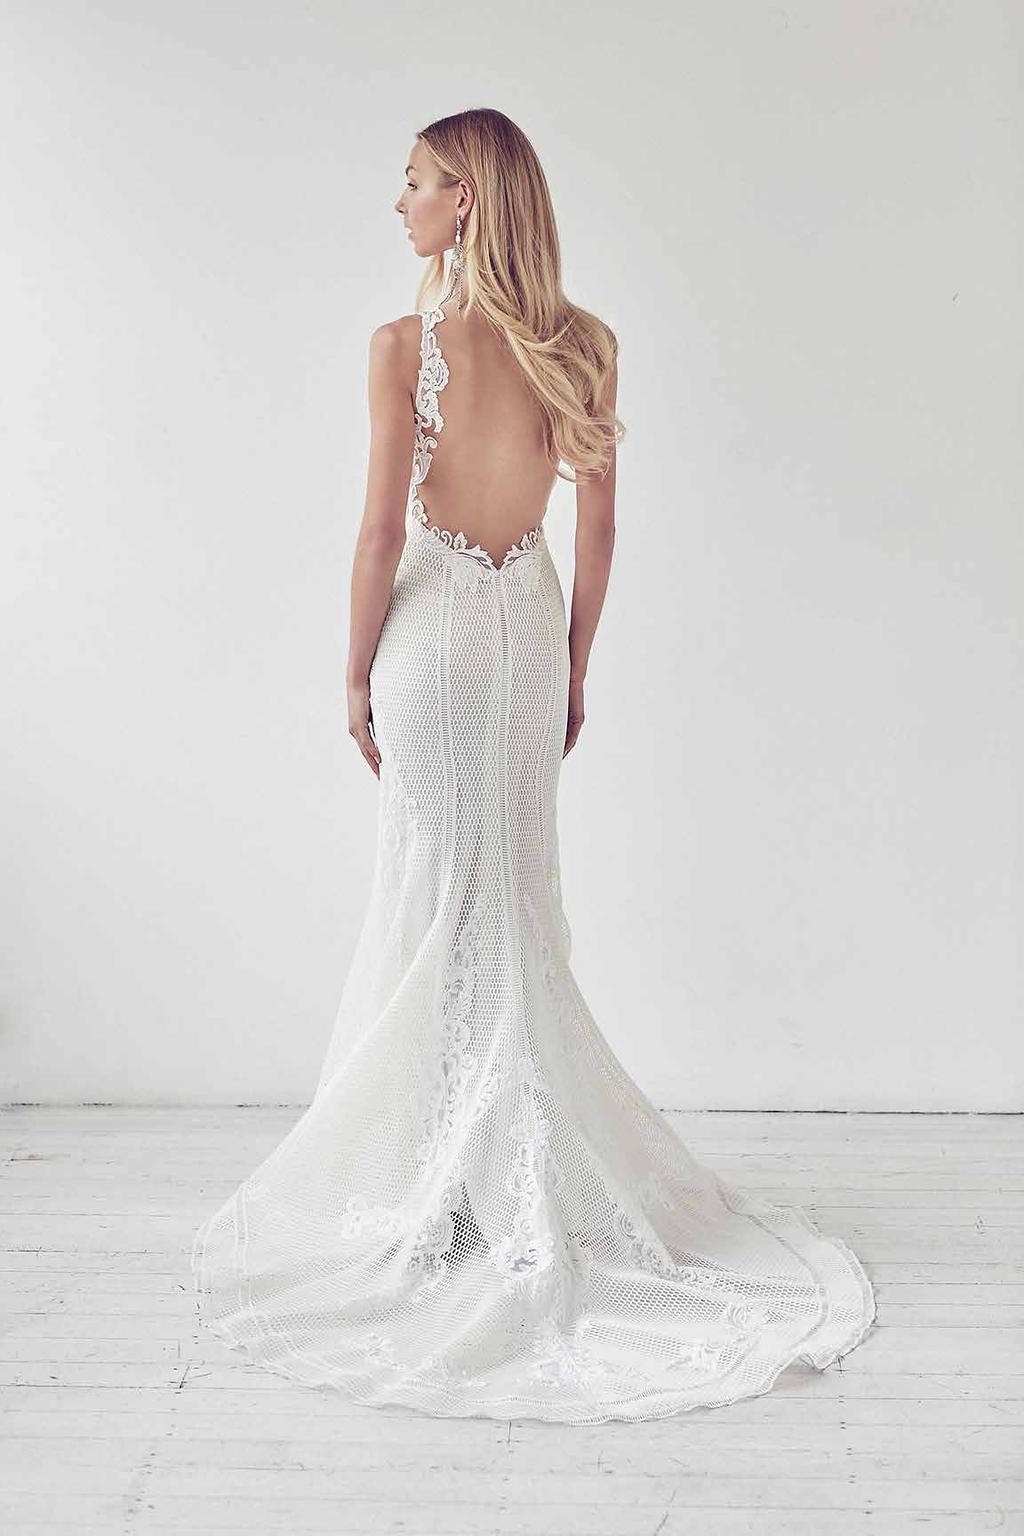 Angelic Gown - IL36 Exclusively hand embroidered lace over honeycomb mesh